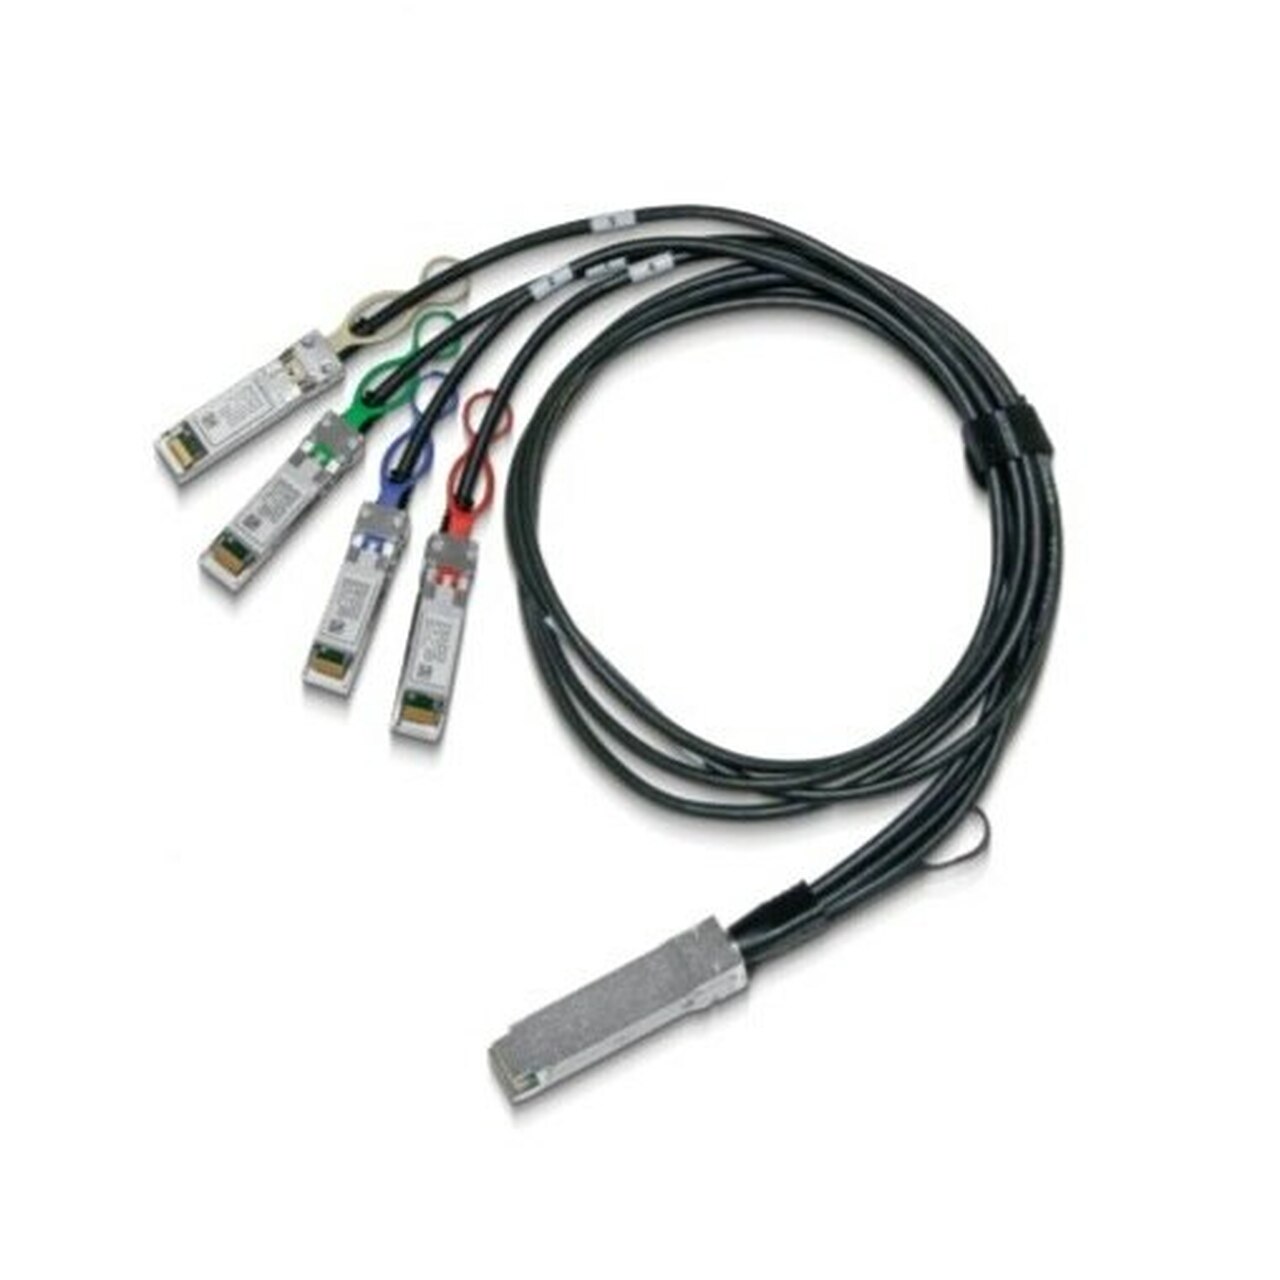 NVIDIA passive copper hybrid cable, ETH 100GbE to 4x25GbE, QSFP28 to 4xSFP28, 2.5m